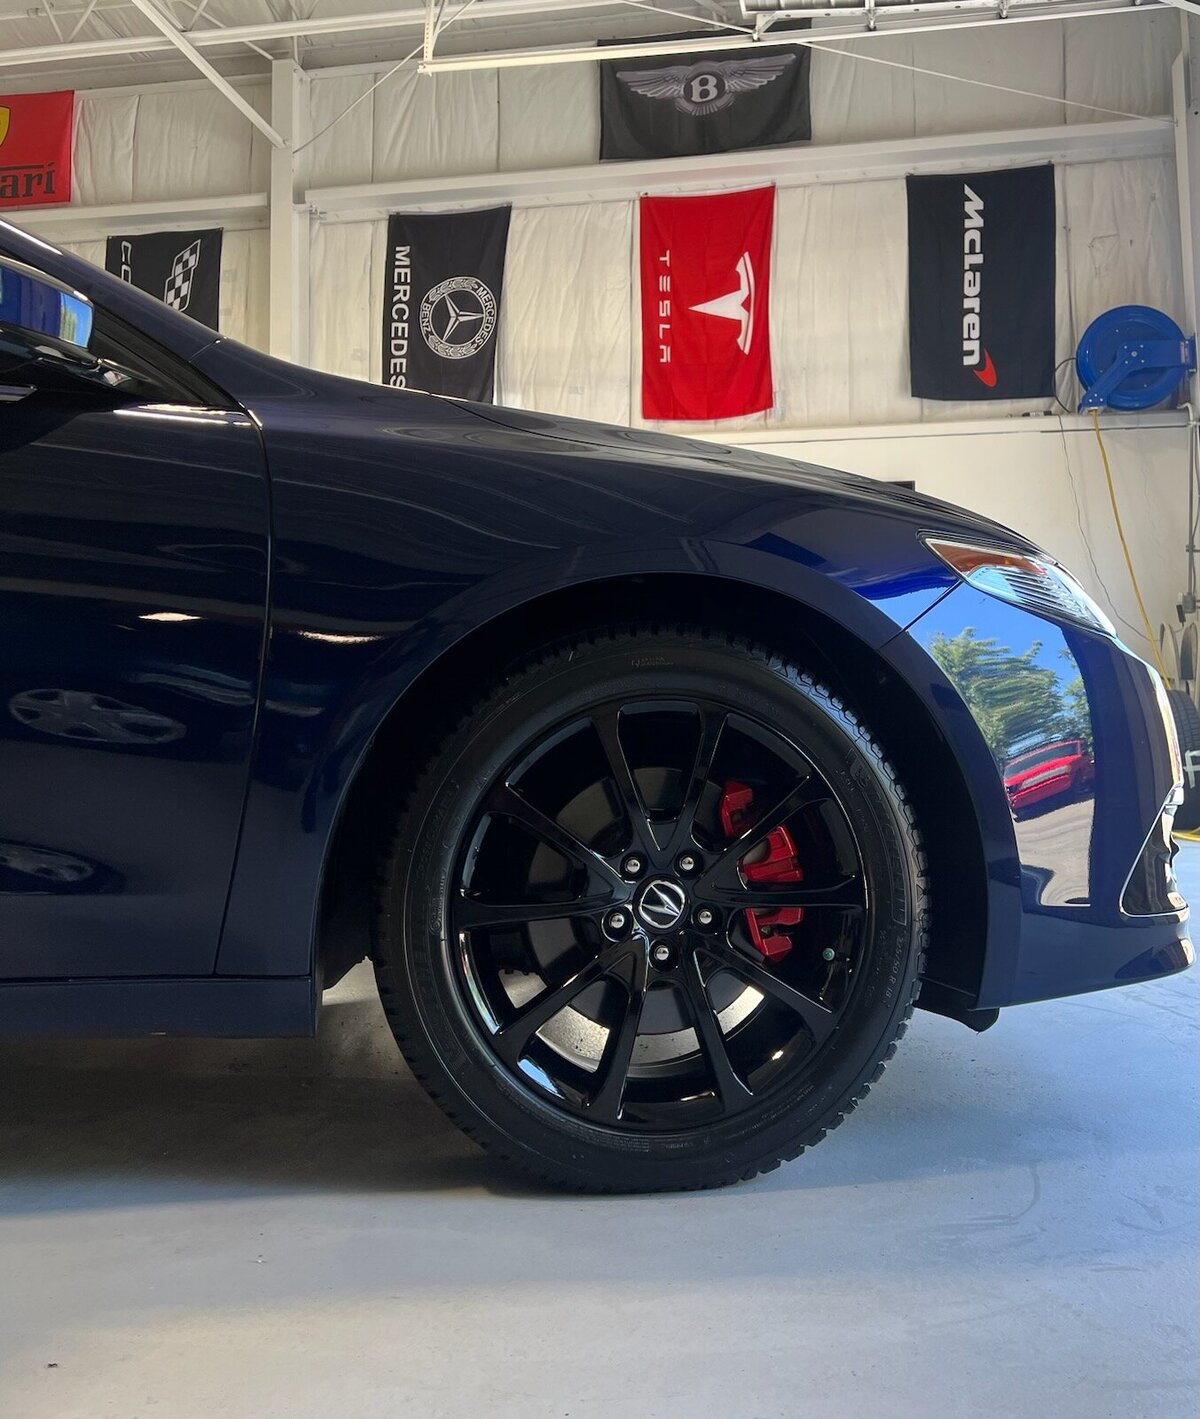 a-nice-touch-auto-detailing-ceramic-coating-rim-acura-calipers-north-haven-ct